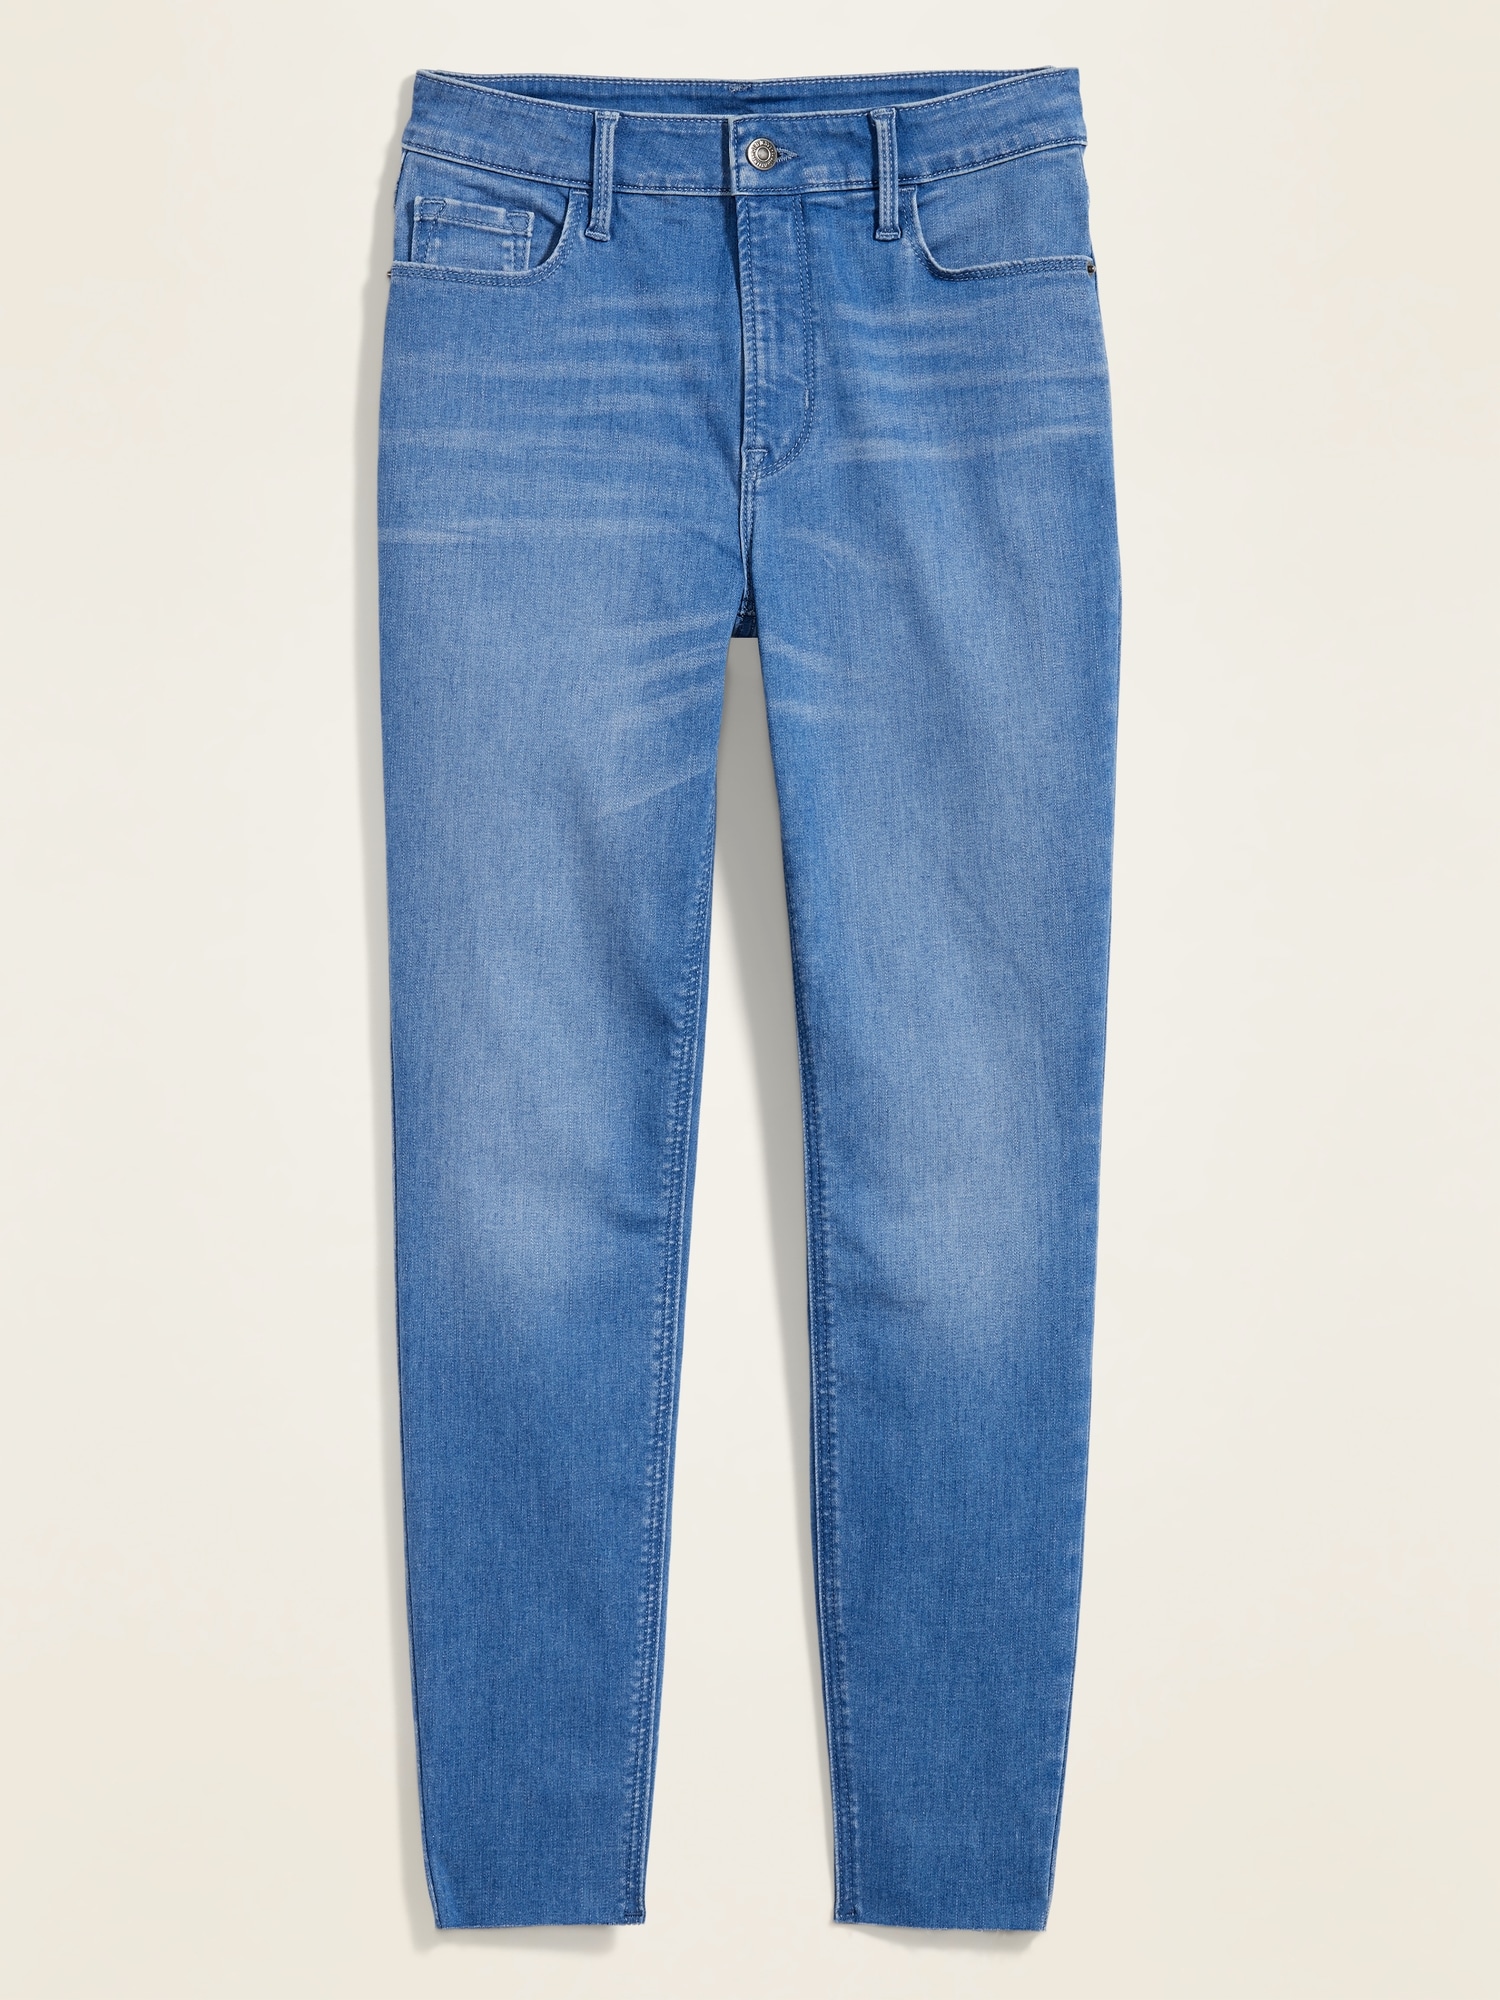 cut off ankle jeans